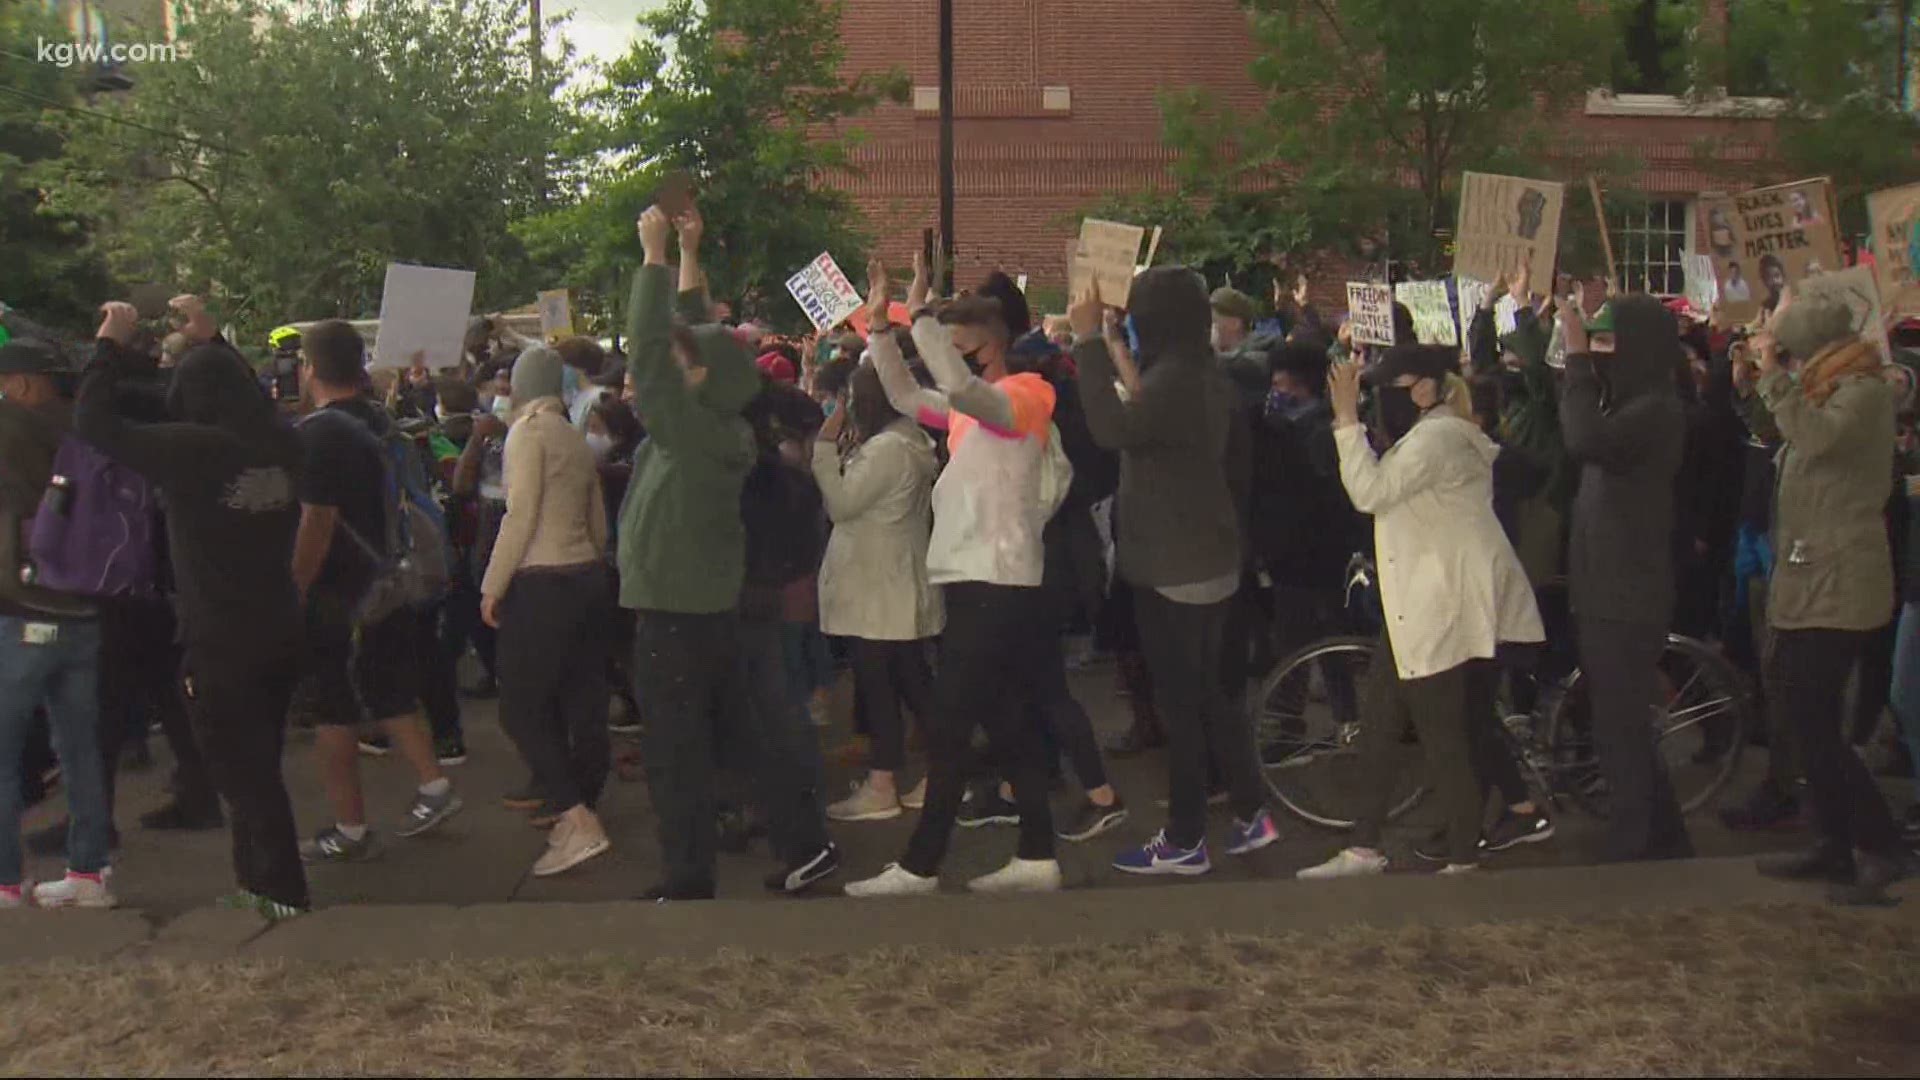 Thousands marched to Irving Park in Northeast Portland and made specific policy change demands for the Portland Police Bureau.